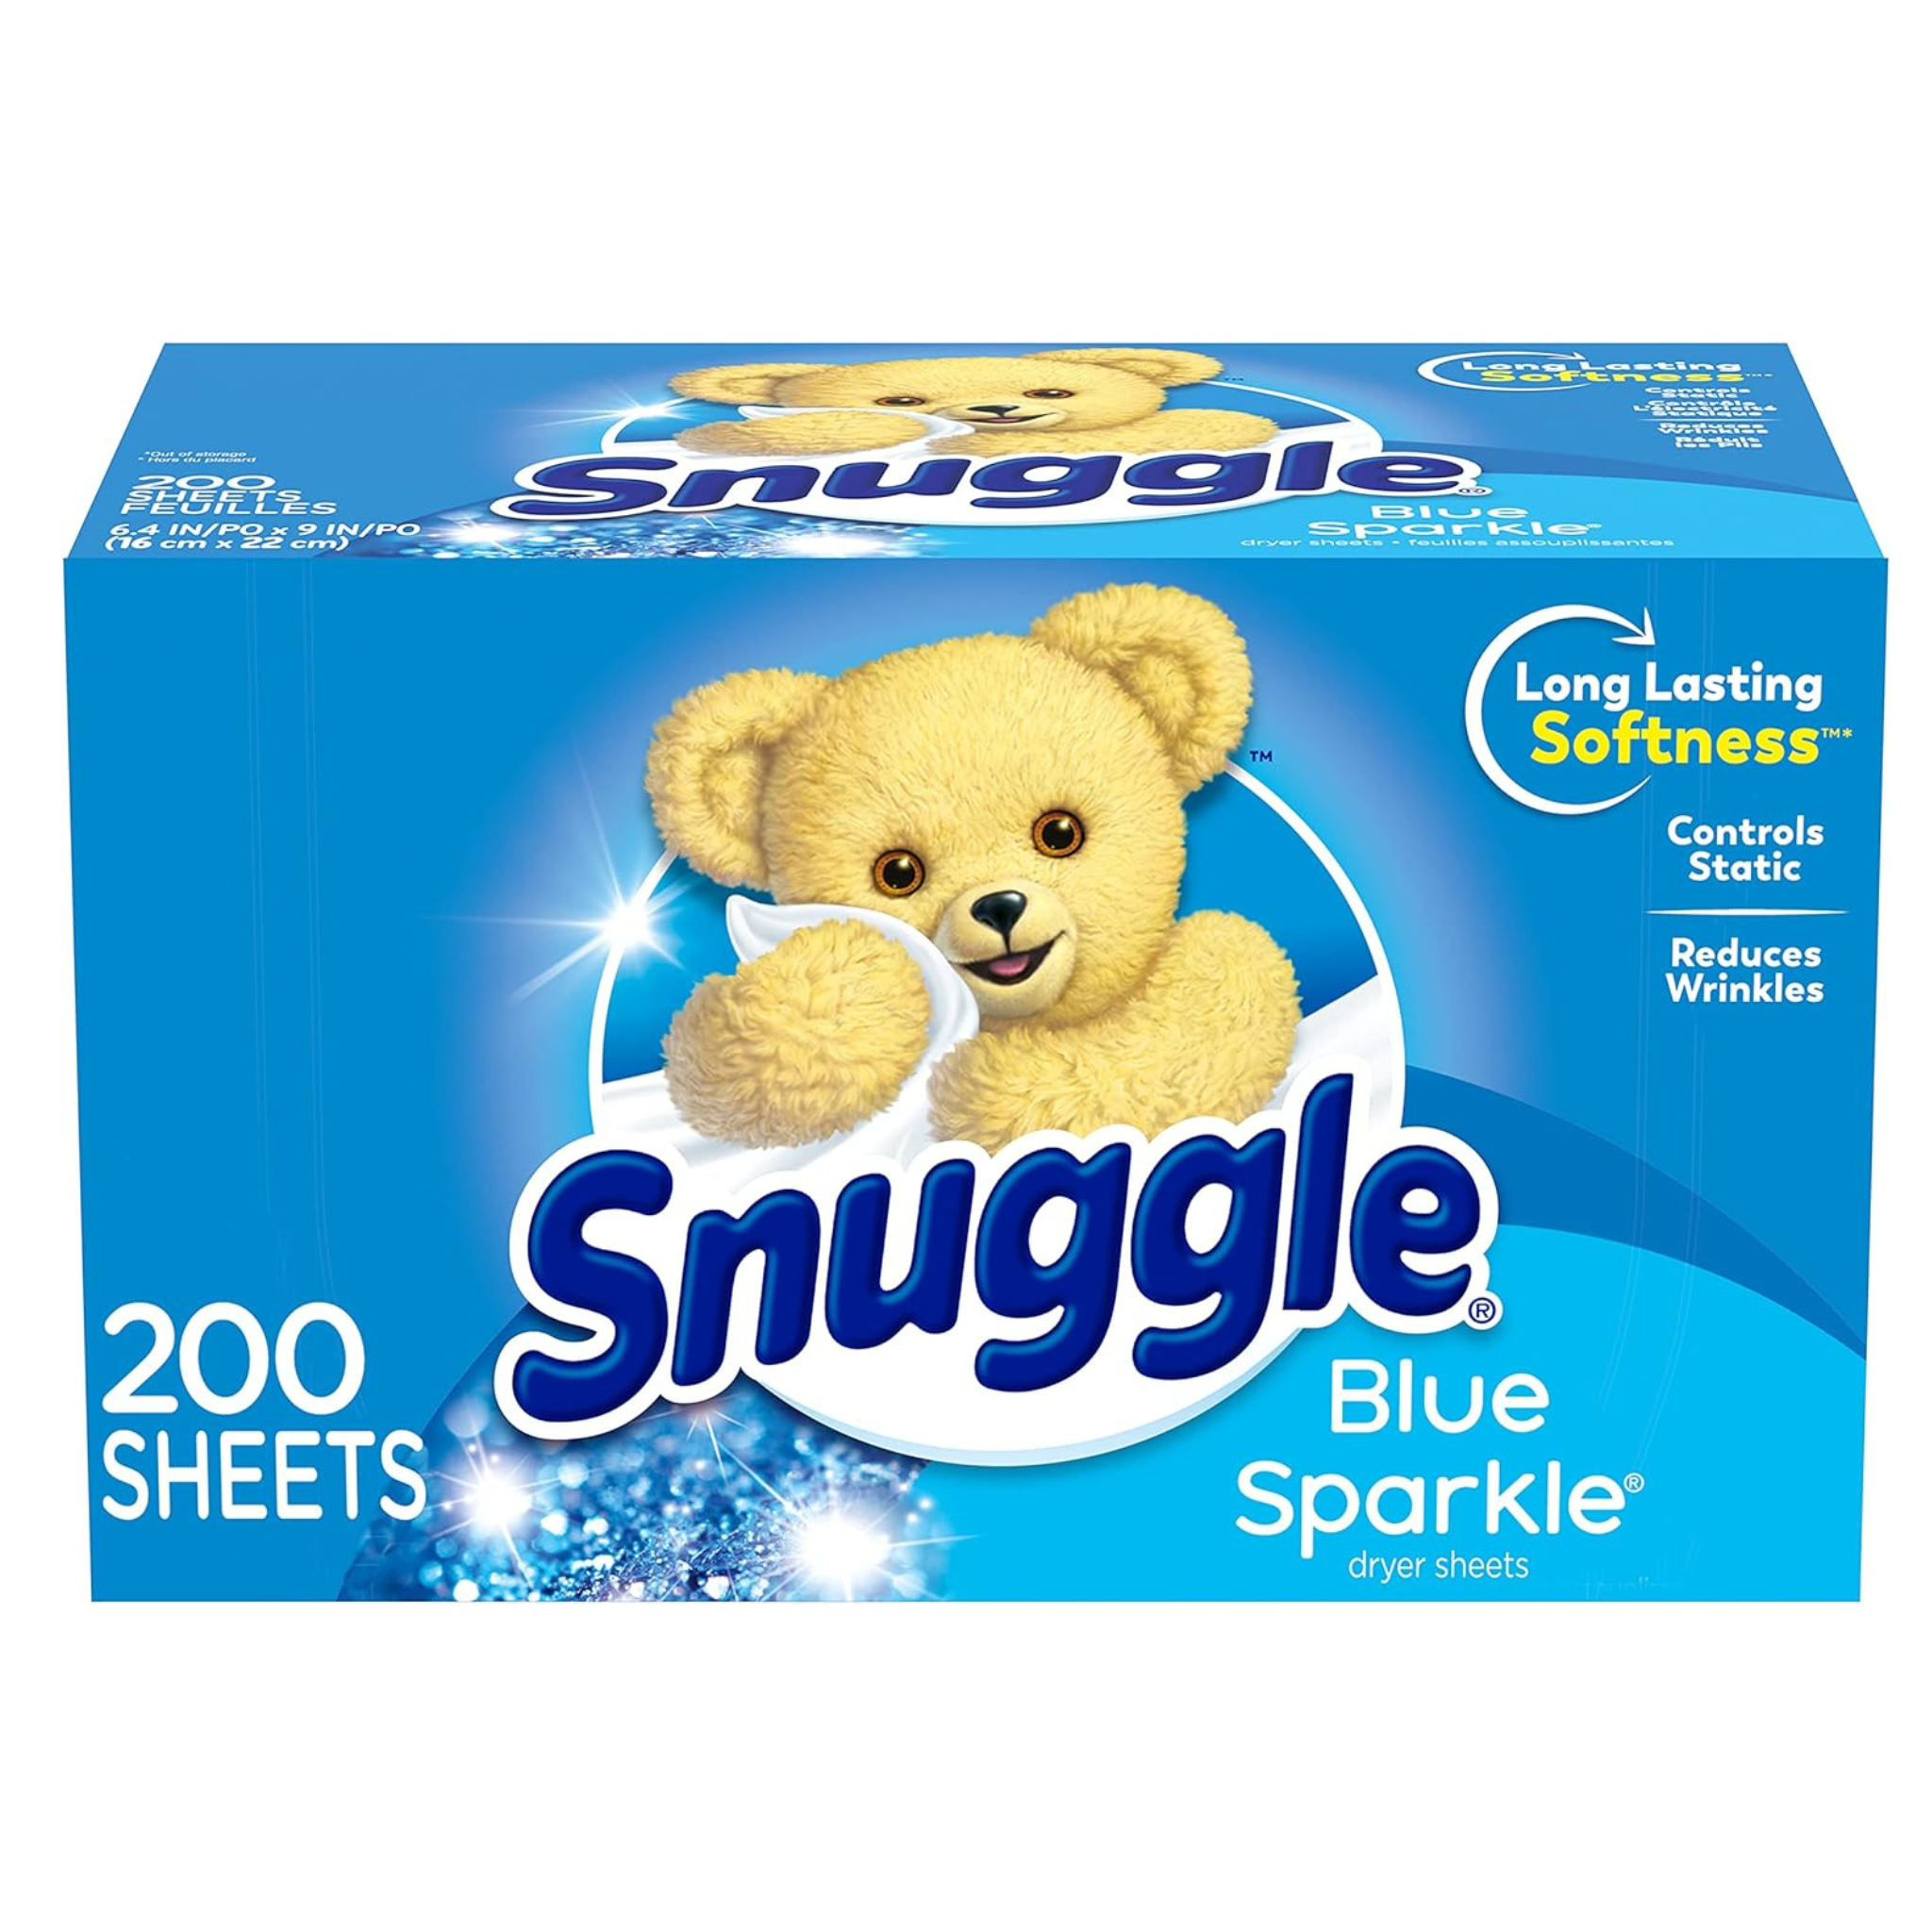 200 Count Snuggle Fabric Softener Dryer Sheets, Blue Sparkle